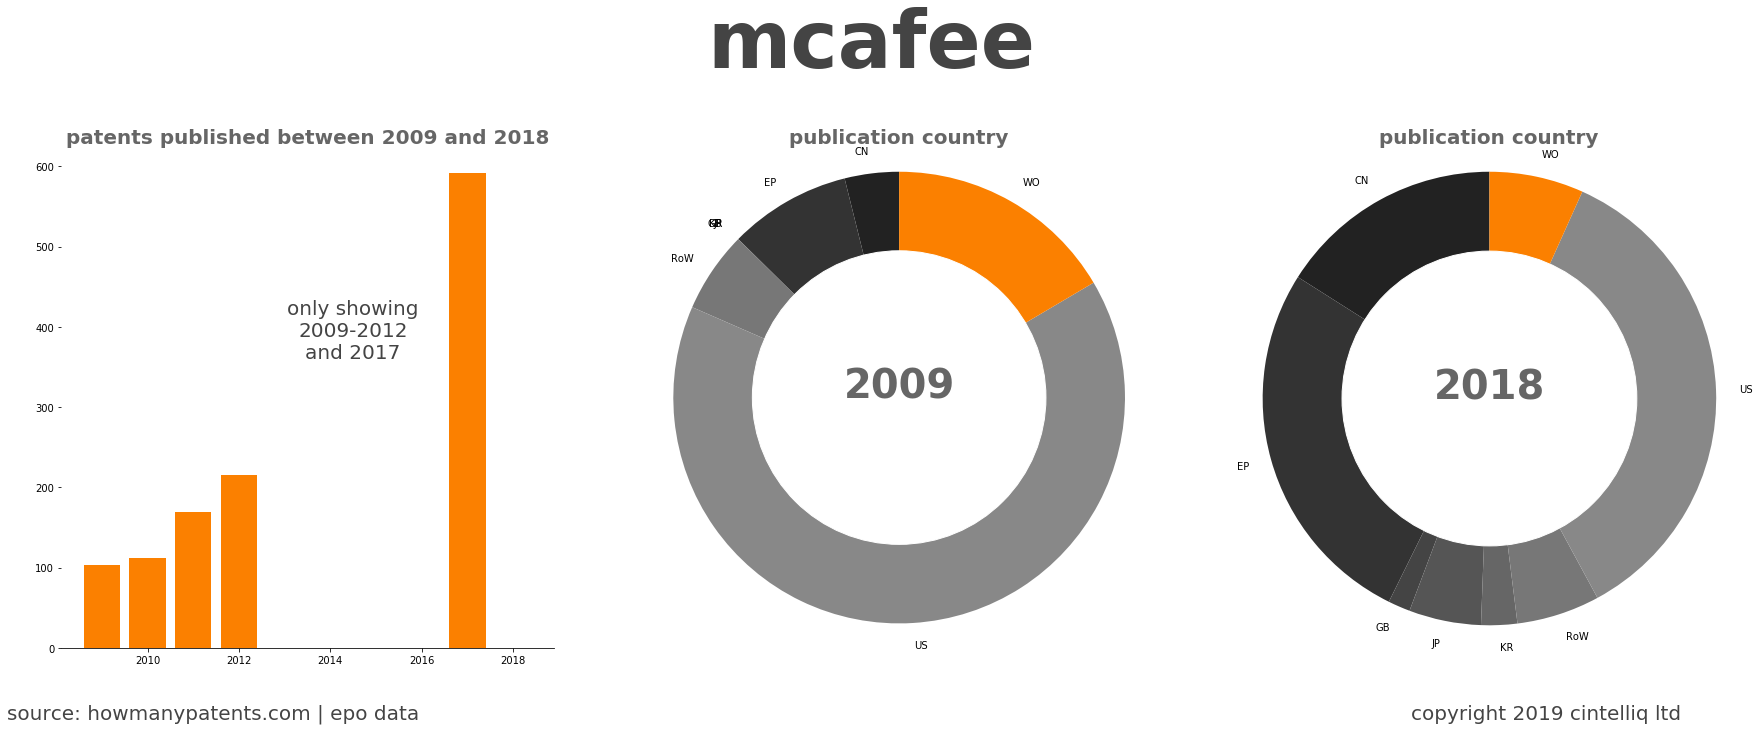 summary of patents for Mcafee